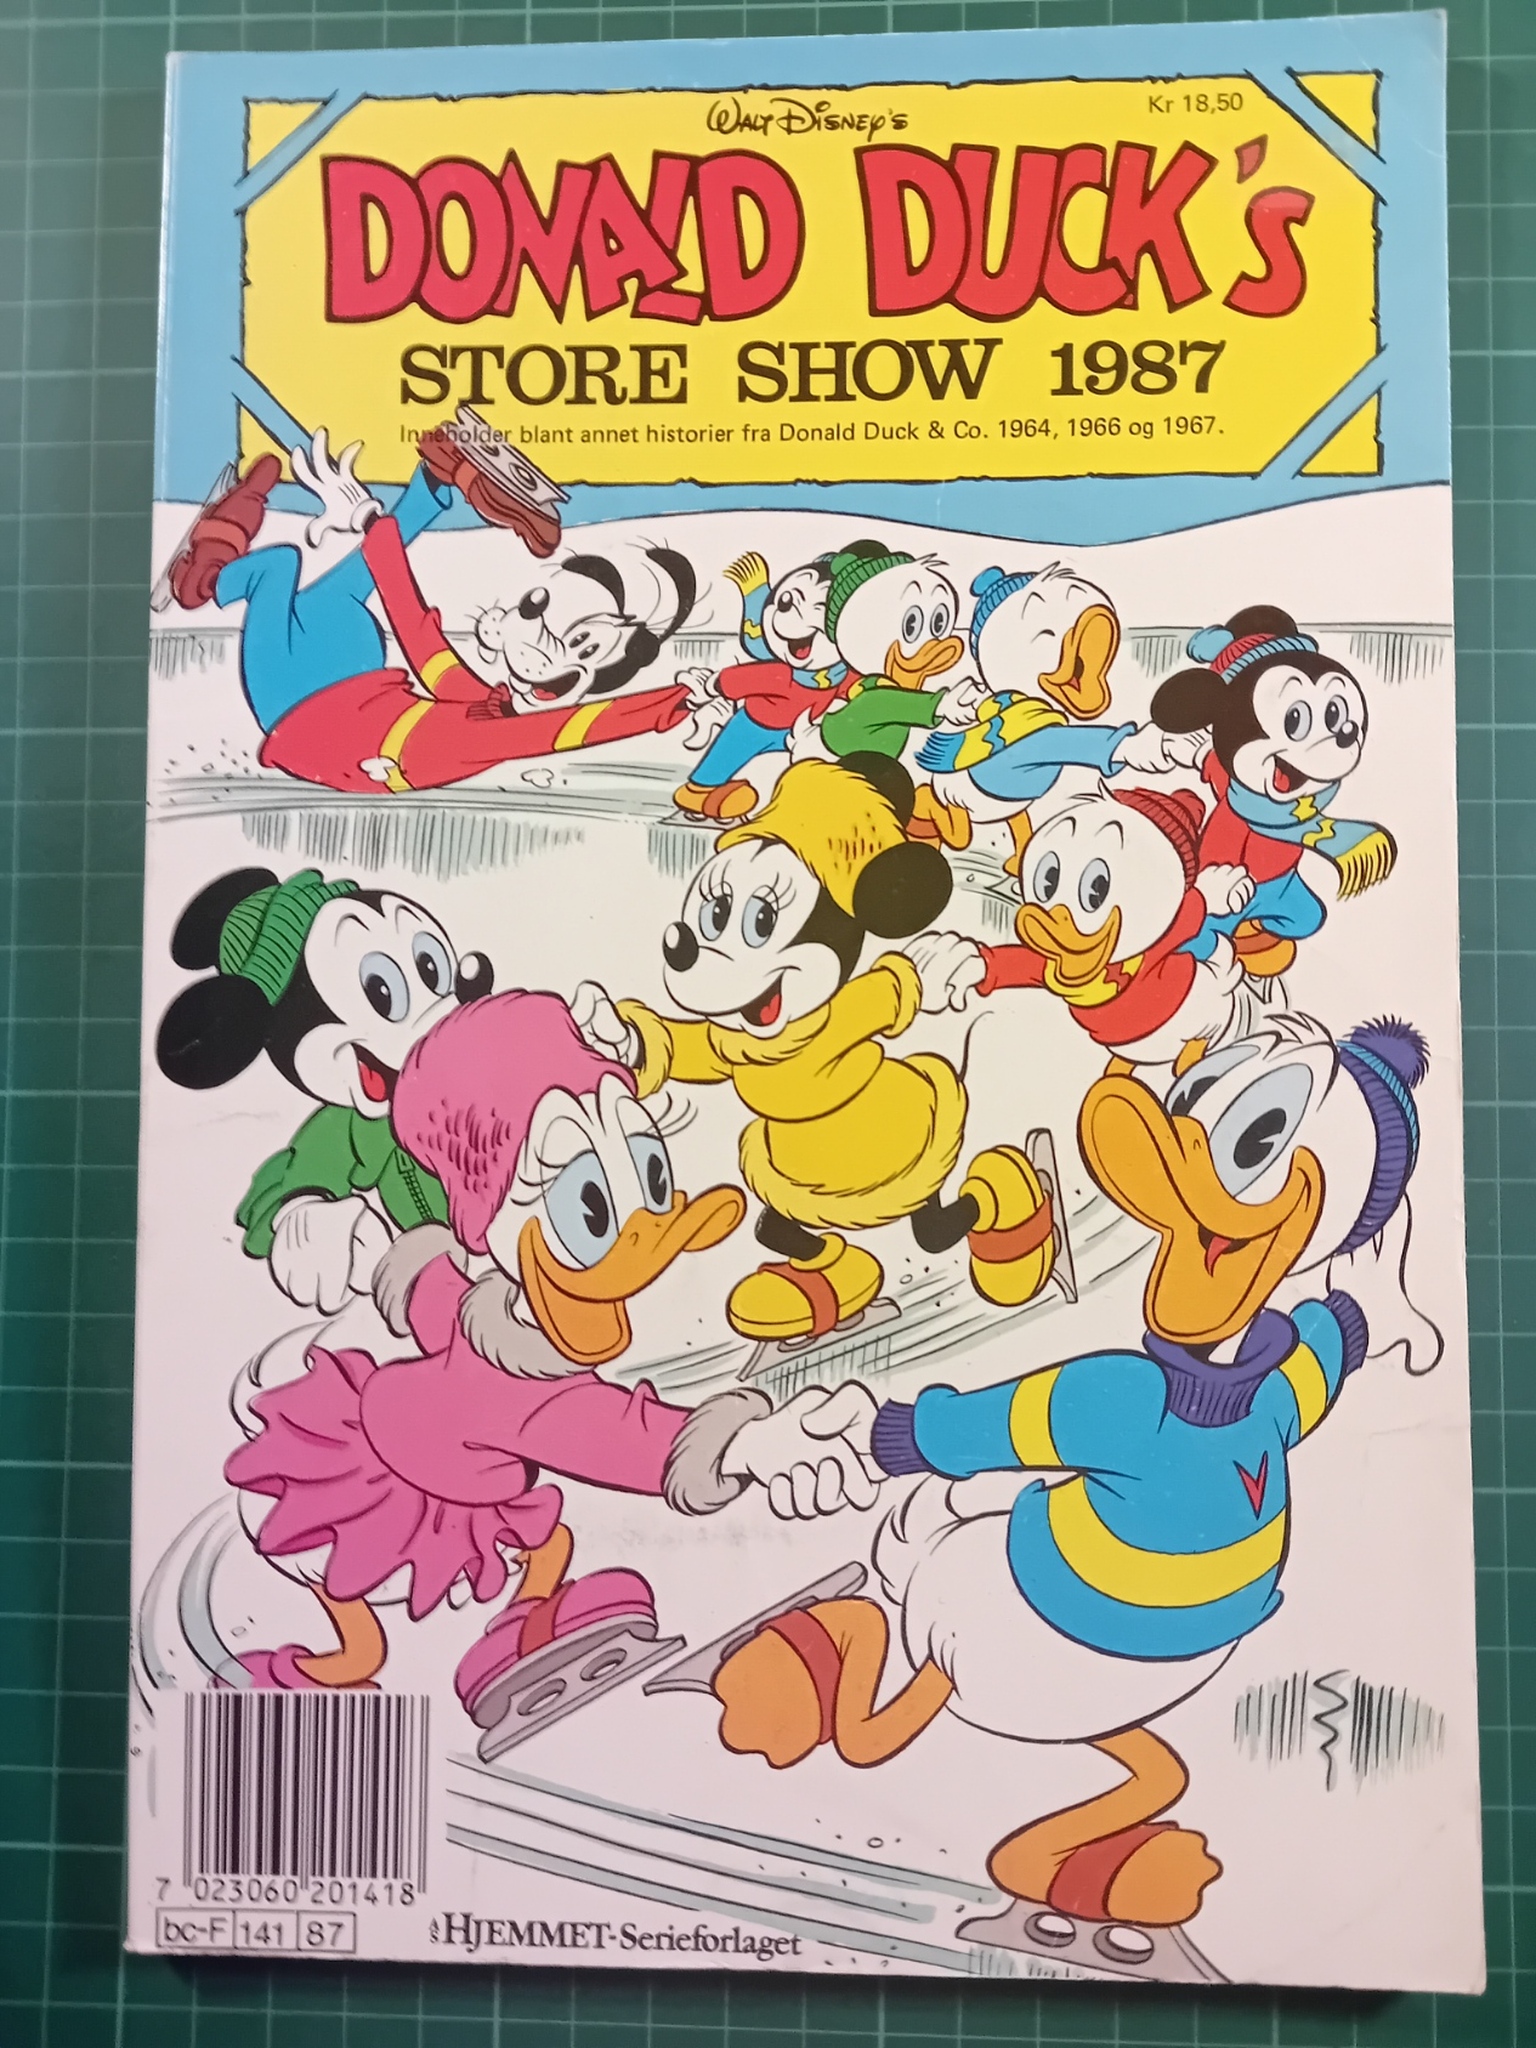 Store show 1987